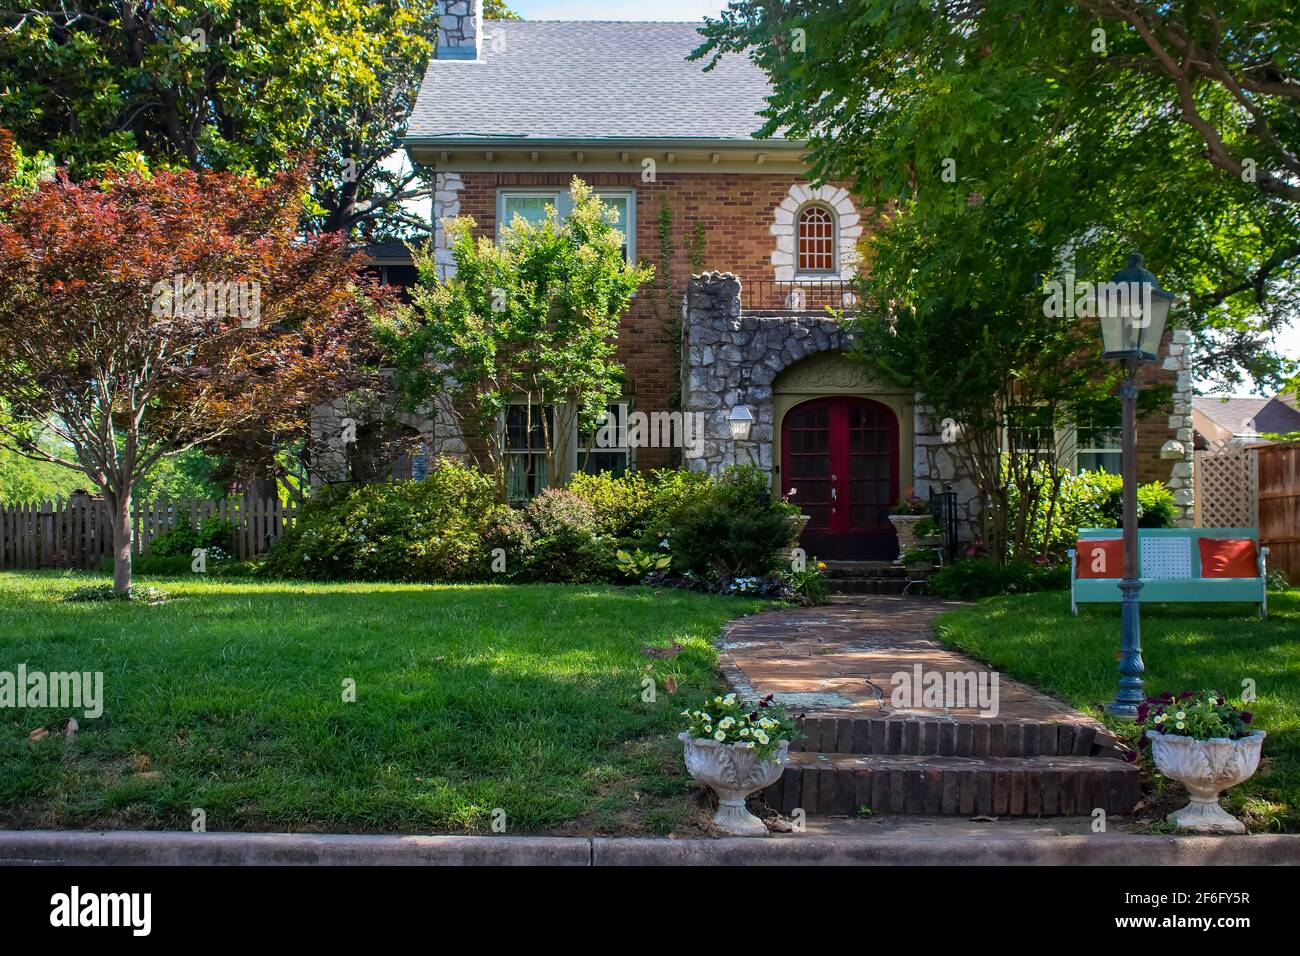 Beautiful upscale house with rock castle like entrance and retro metal lounger  and little rabbit in front yard - curb appeal Stock Photo